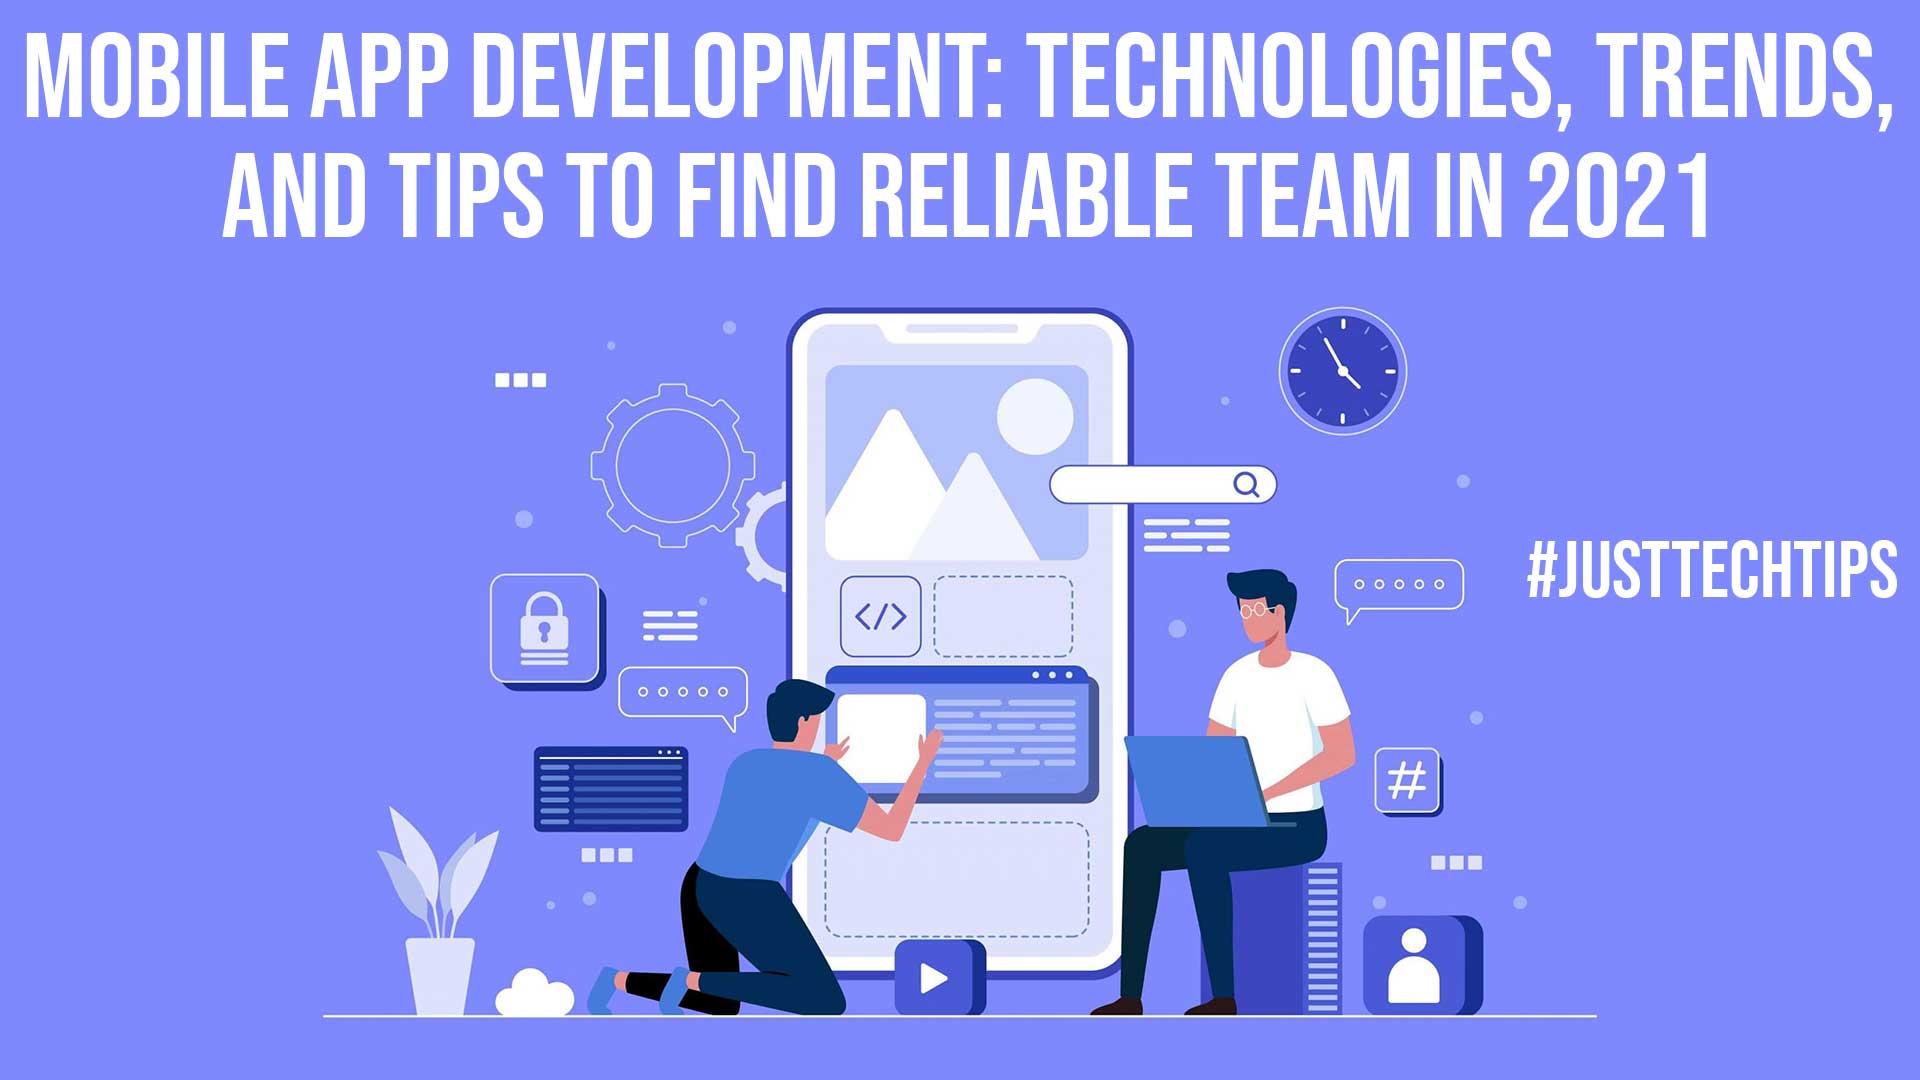 Mobile App Development Technologies Trends and Tips to Find Reliable Team in 2021